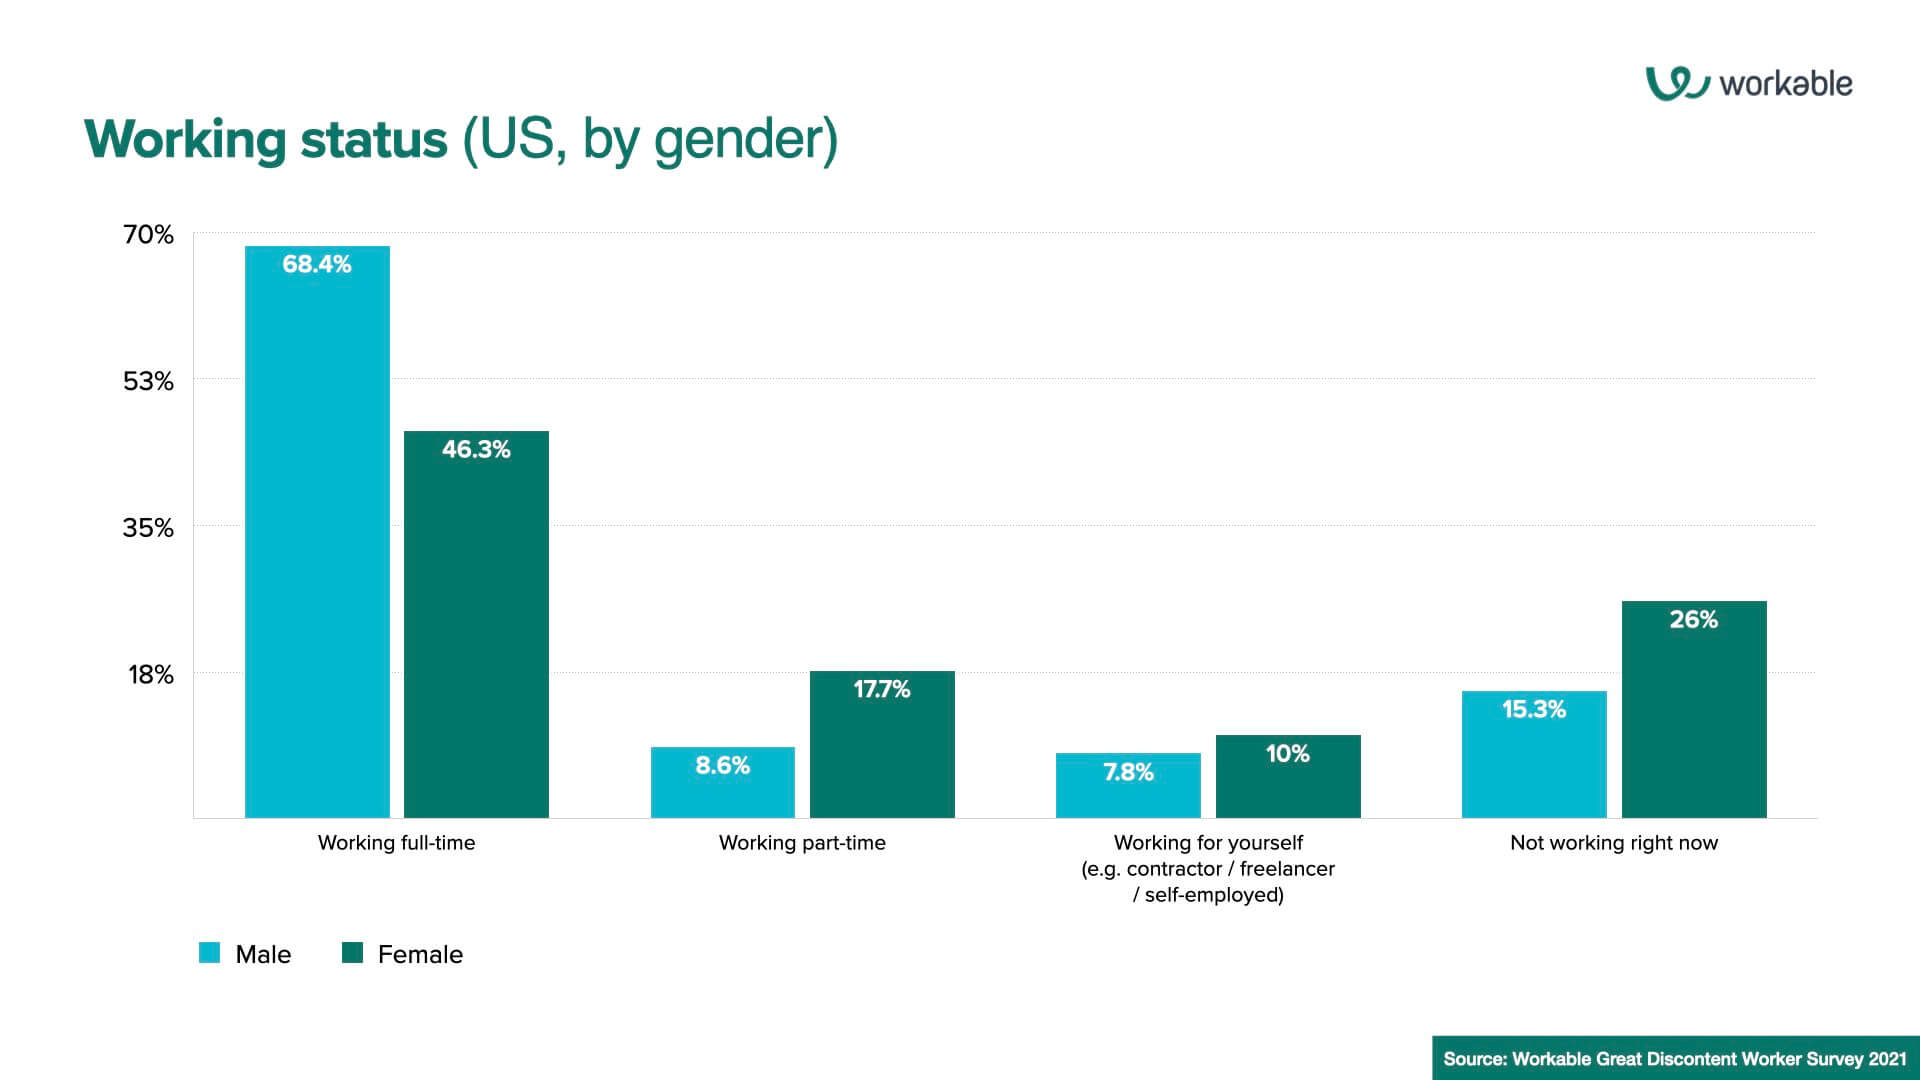 Great Discontent working status - by gender